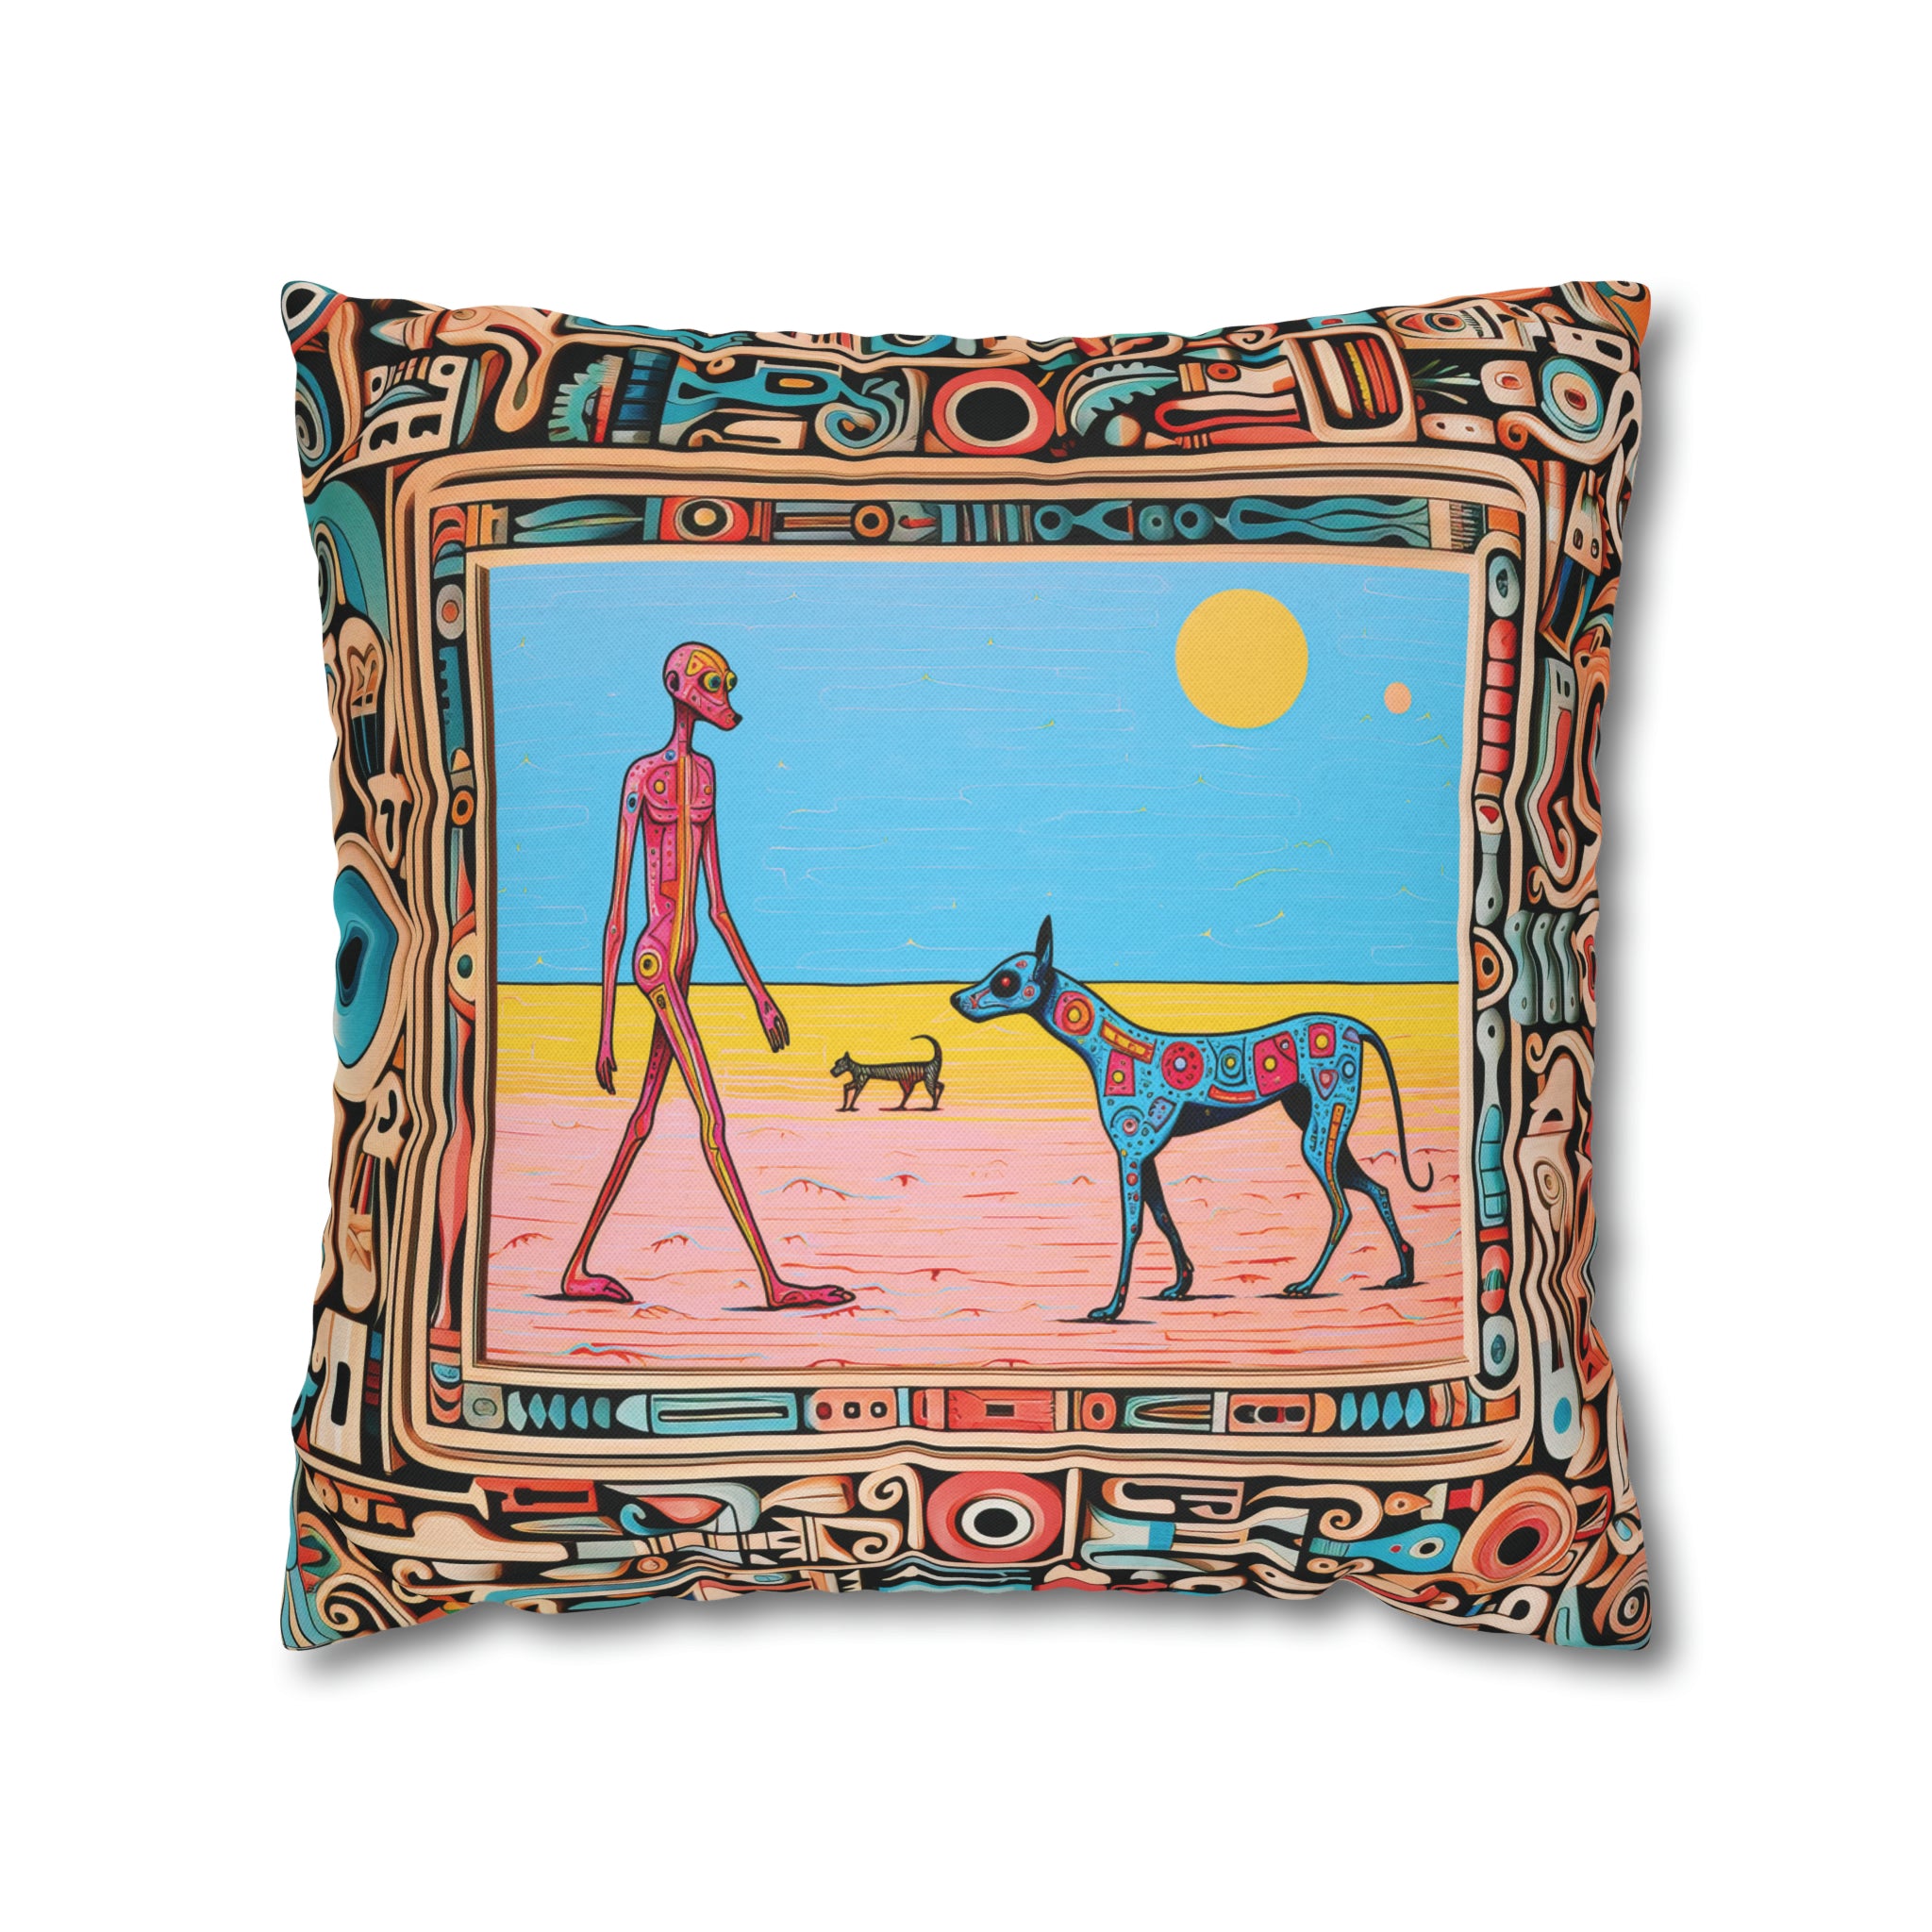 Square Pillow Case 18" x 18", CASE ONLY, no pillow form, original Pop Art Style, Pink Alien & Blue Dog in a Frame